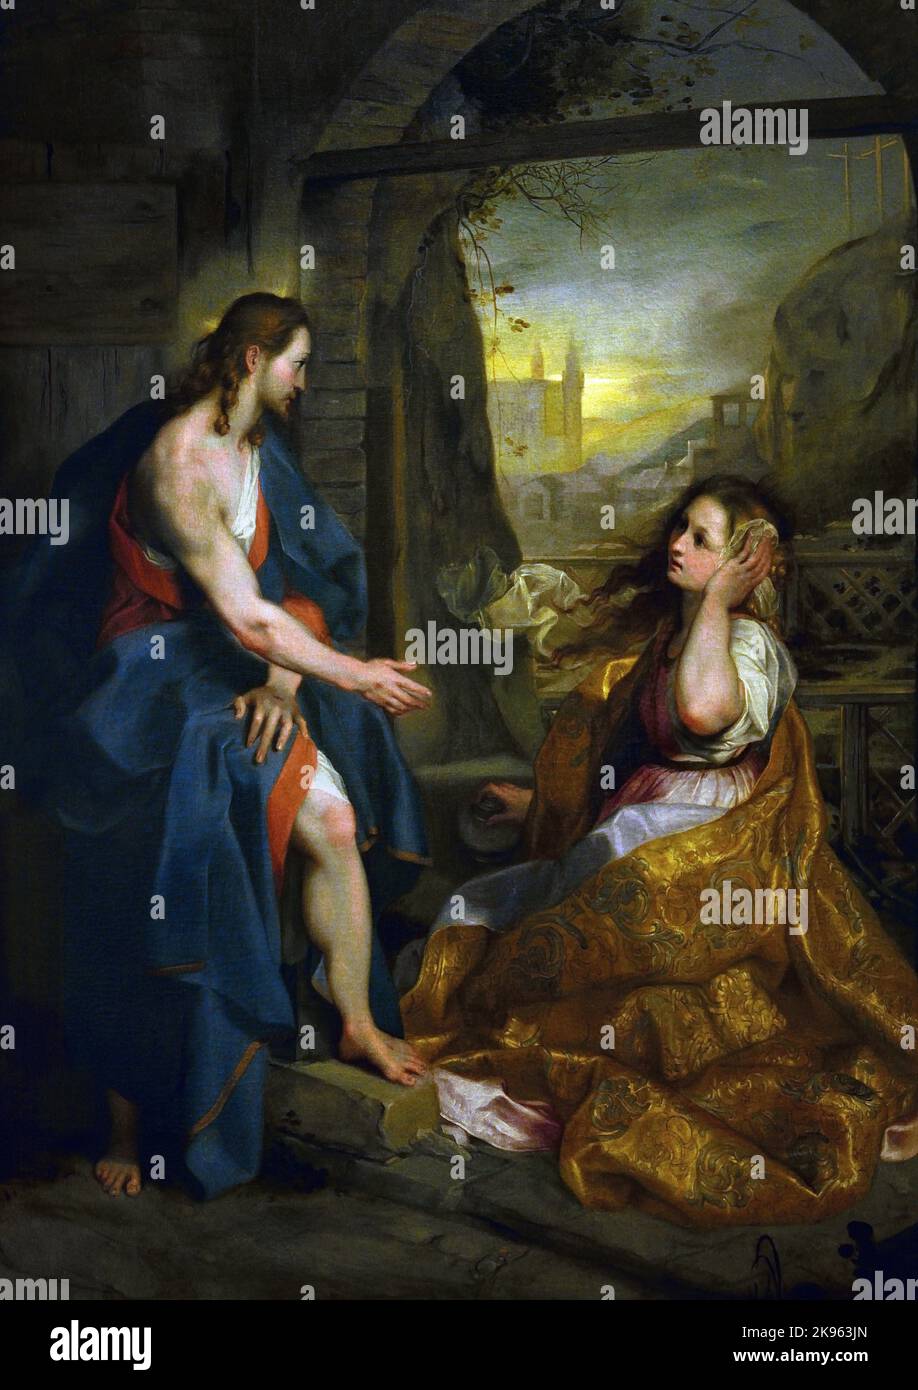 Christ Appears to Mary Magdalen ( Noli me Tangere) 1590  by LE BAROCHE, Urbino, 1535 - Urbino, 1612, Italian, Italy, Noli me tangere ,(touch me not ), Latin version of a phrase spoken, according to John 20:17, Jesus to Mary Magdalene when she recognized him after his, resurrection, Stock Photo